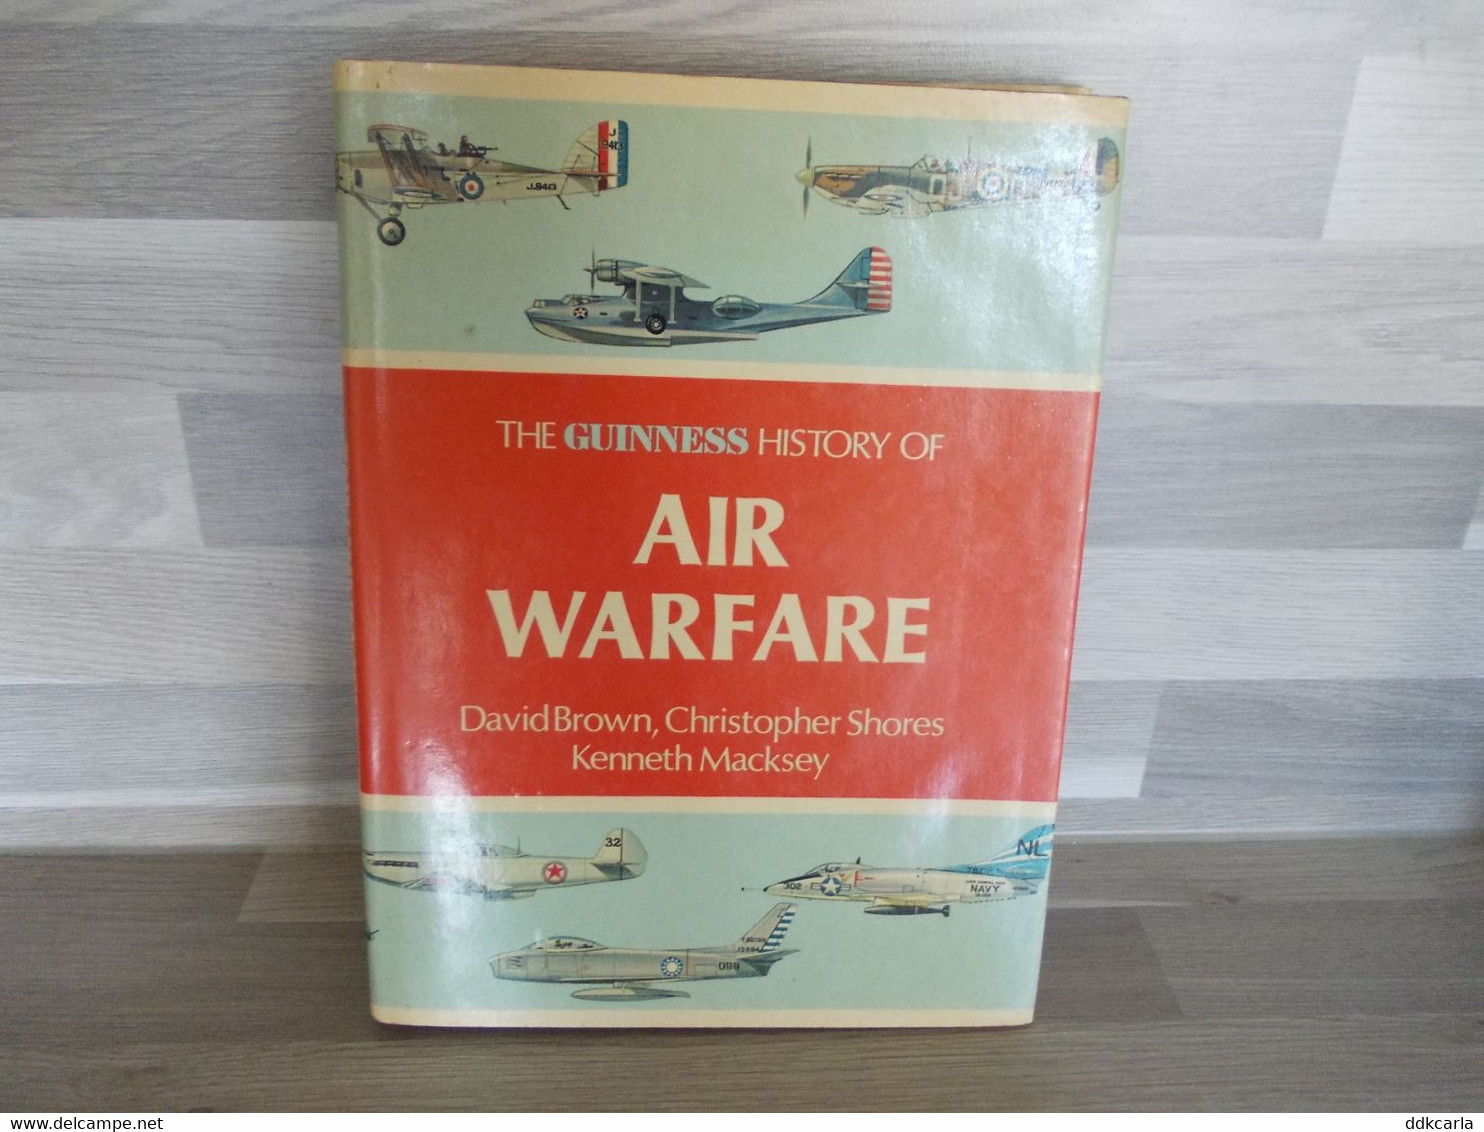 Boek - The Guinness History Of AIR WARFARE By David Brown, Christopher Shores & Kenneth Macksey - Guerra 1914-18